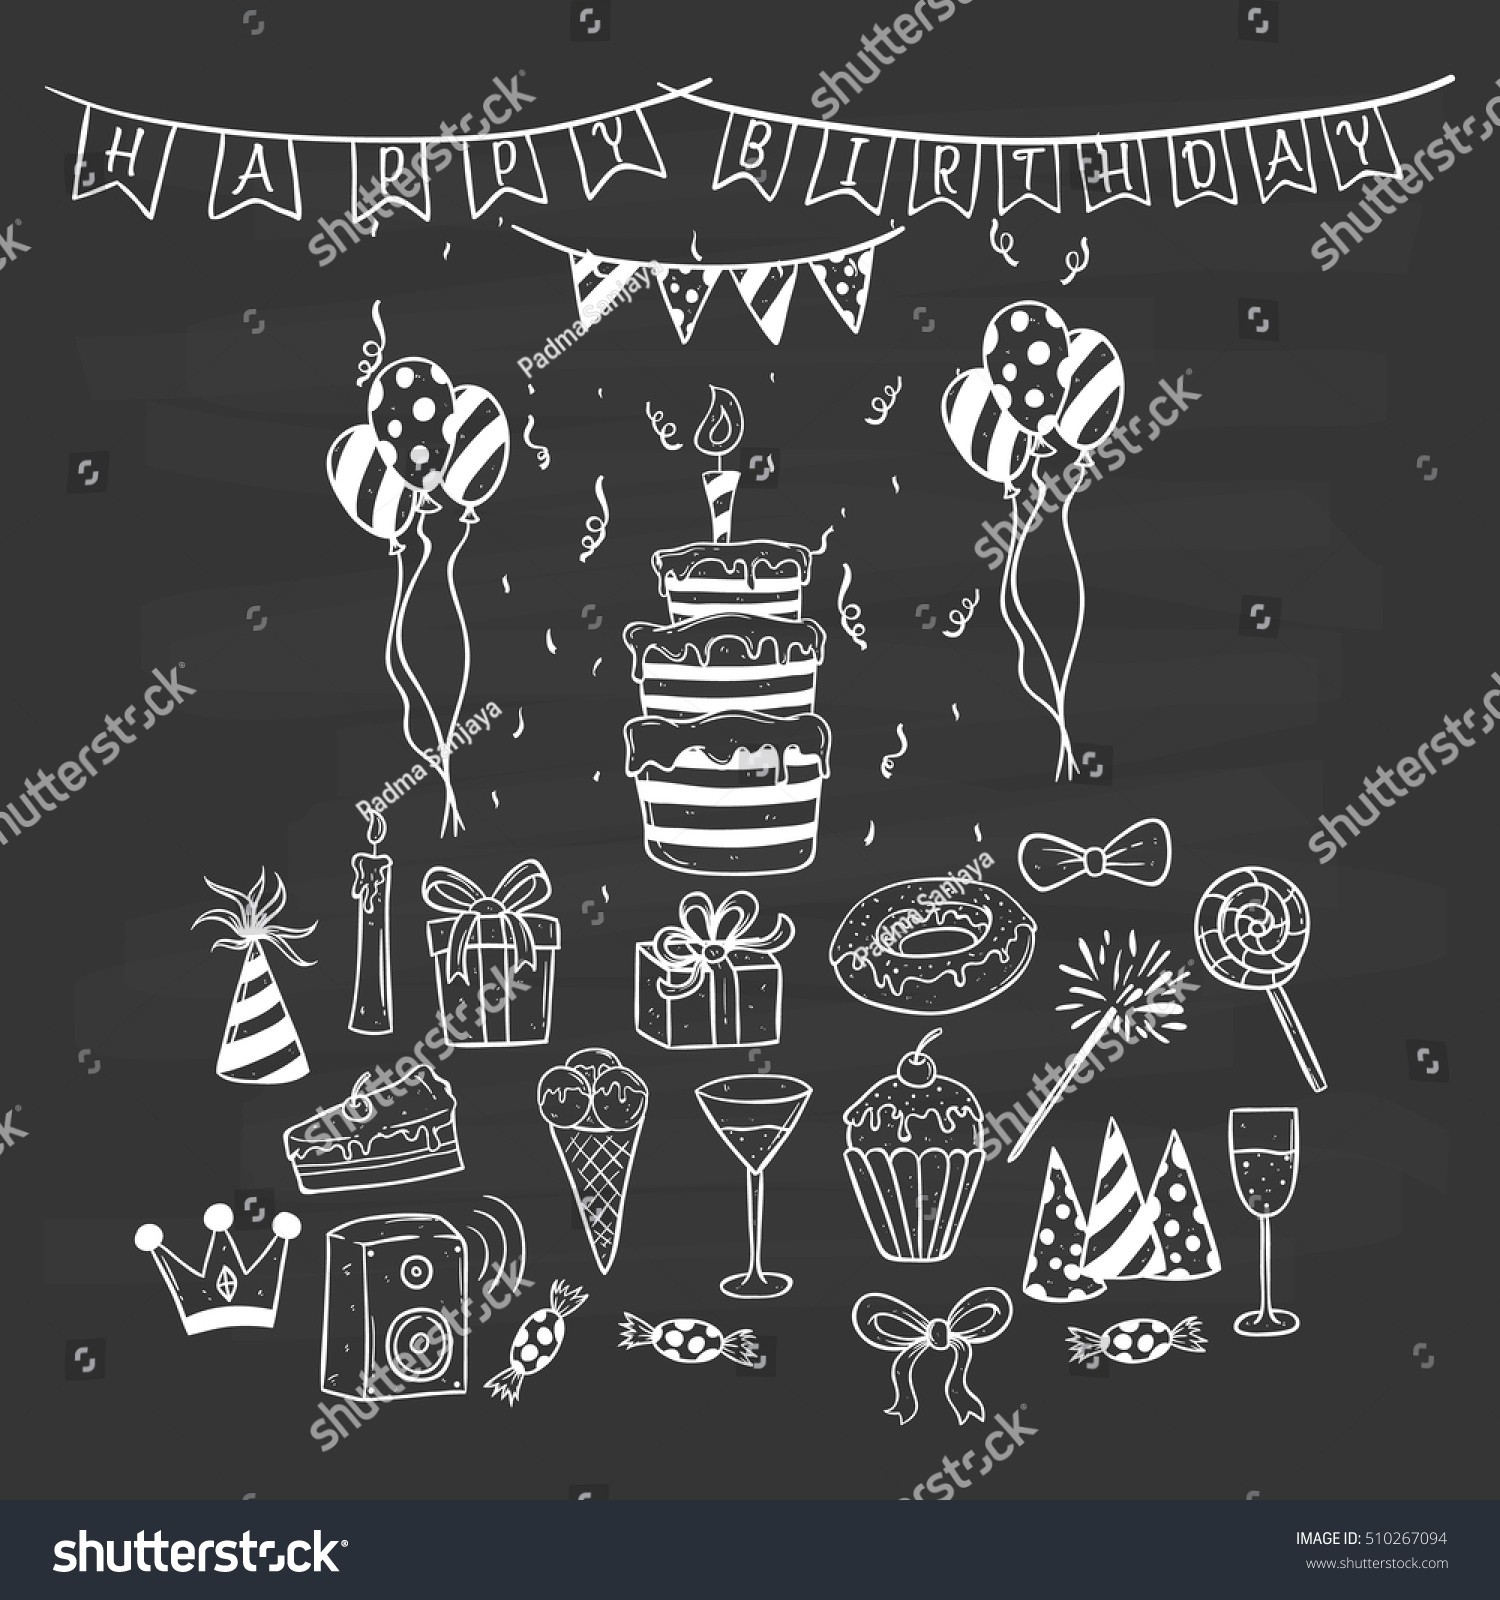 Cute Birthday Party Elements Using Hand Stock Vector Royalty Free